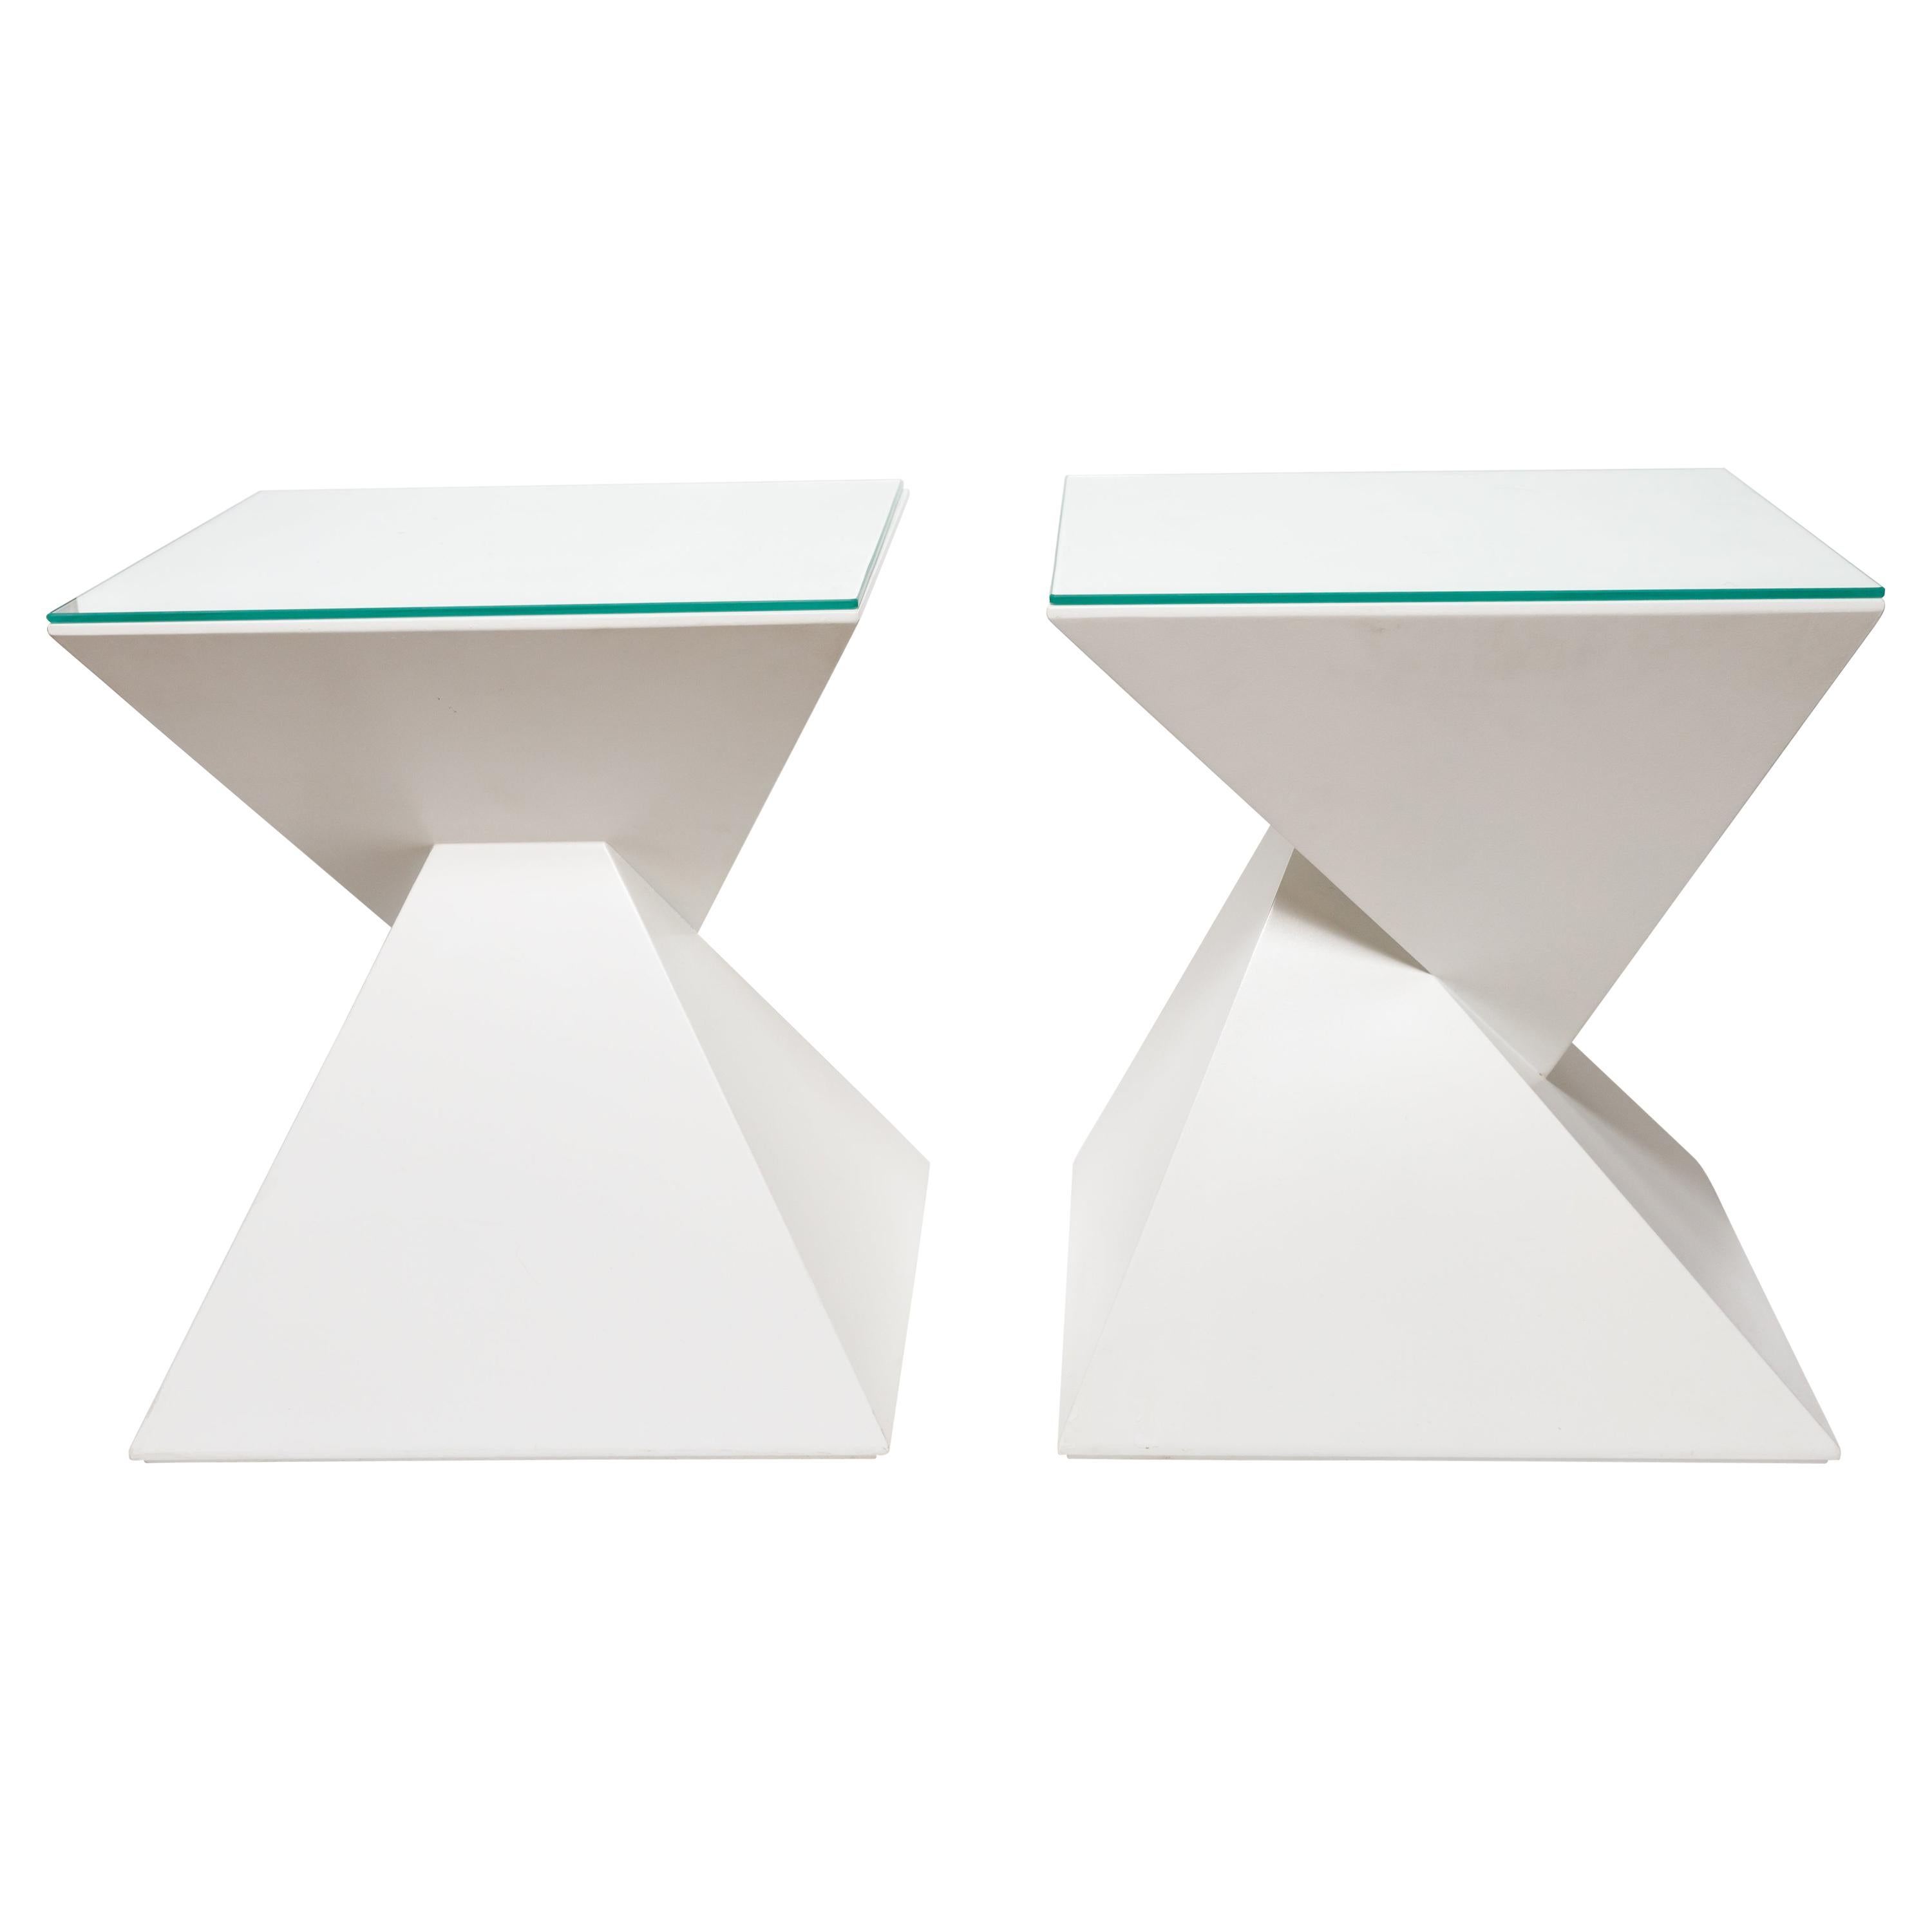 Pair of Painted Wood, Angular, Geometric Side Tables with Glass Tops